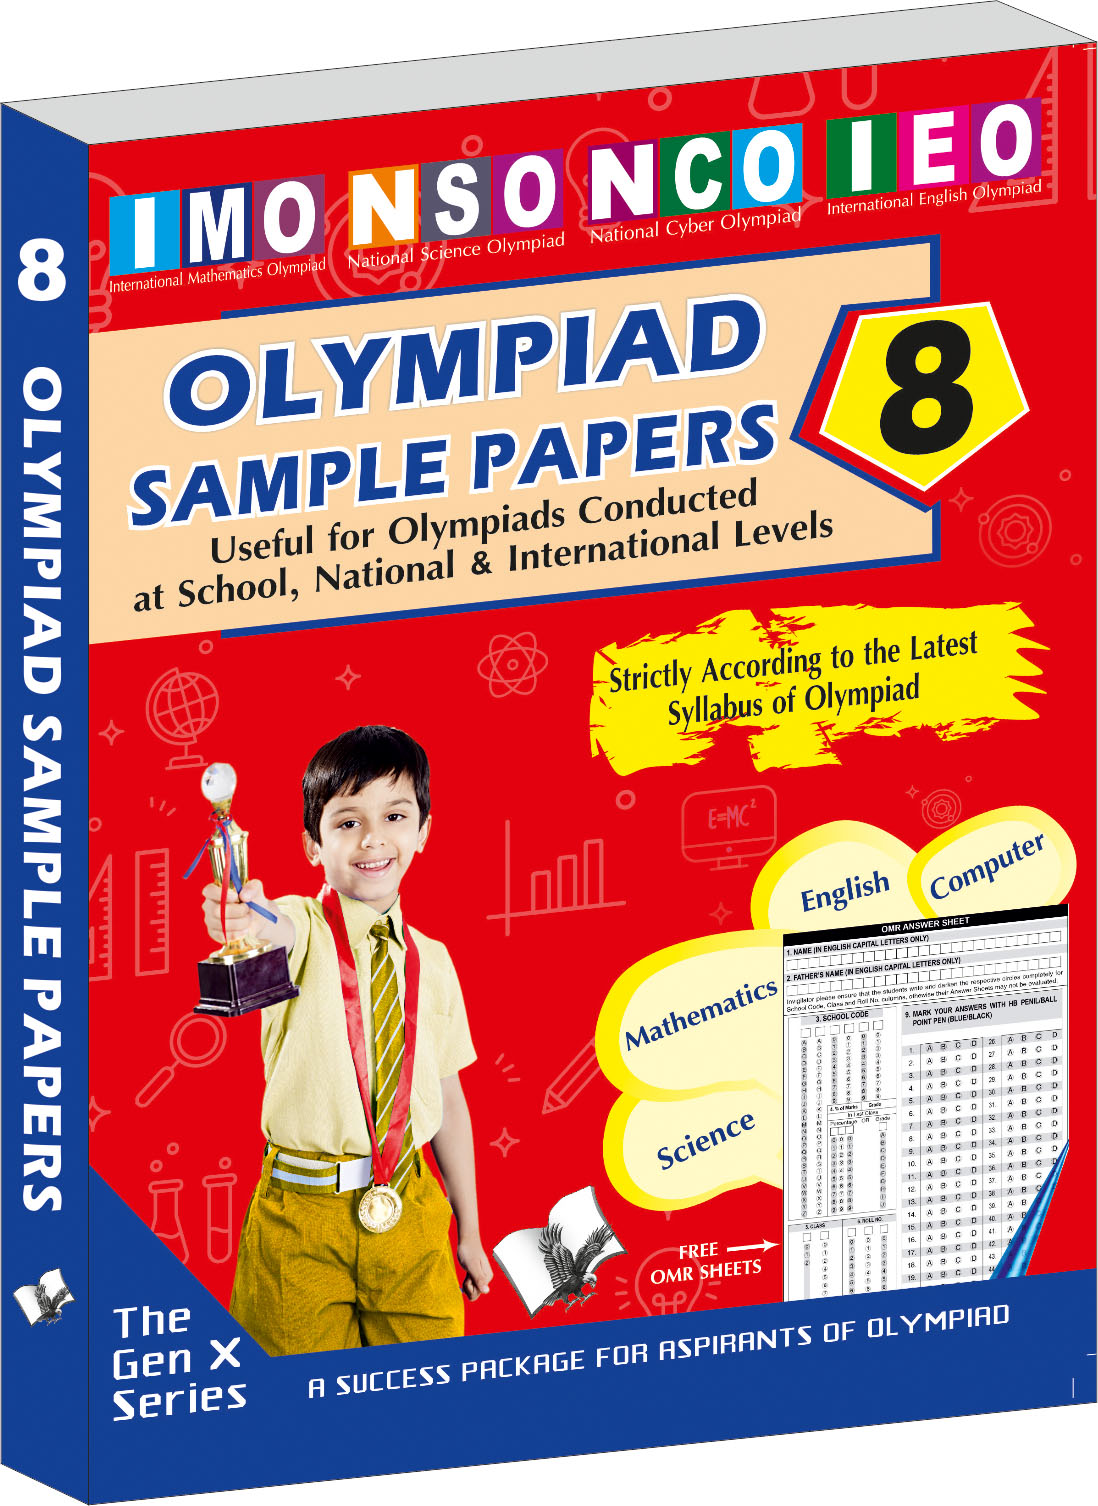 Olympiad Sample Paper 8-Useful for Olympiad conducted at School, National & International levels